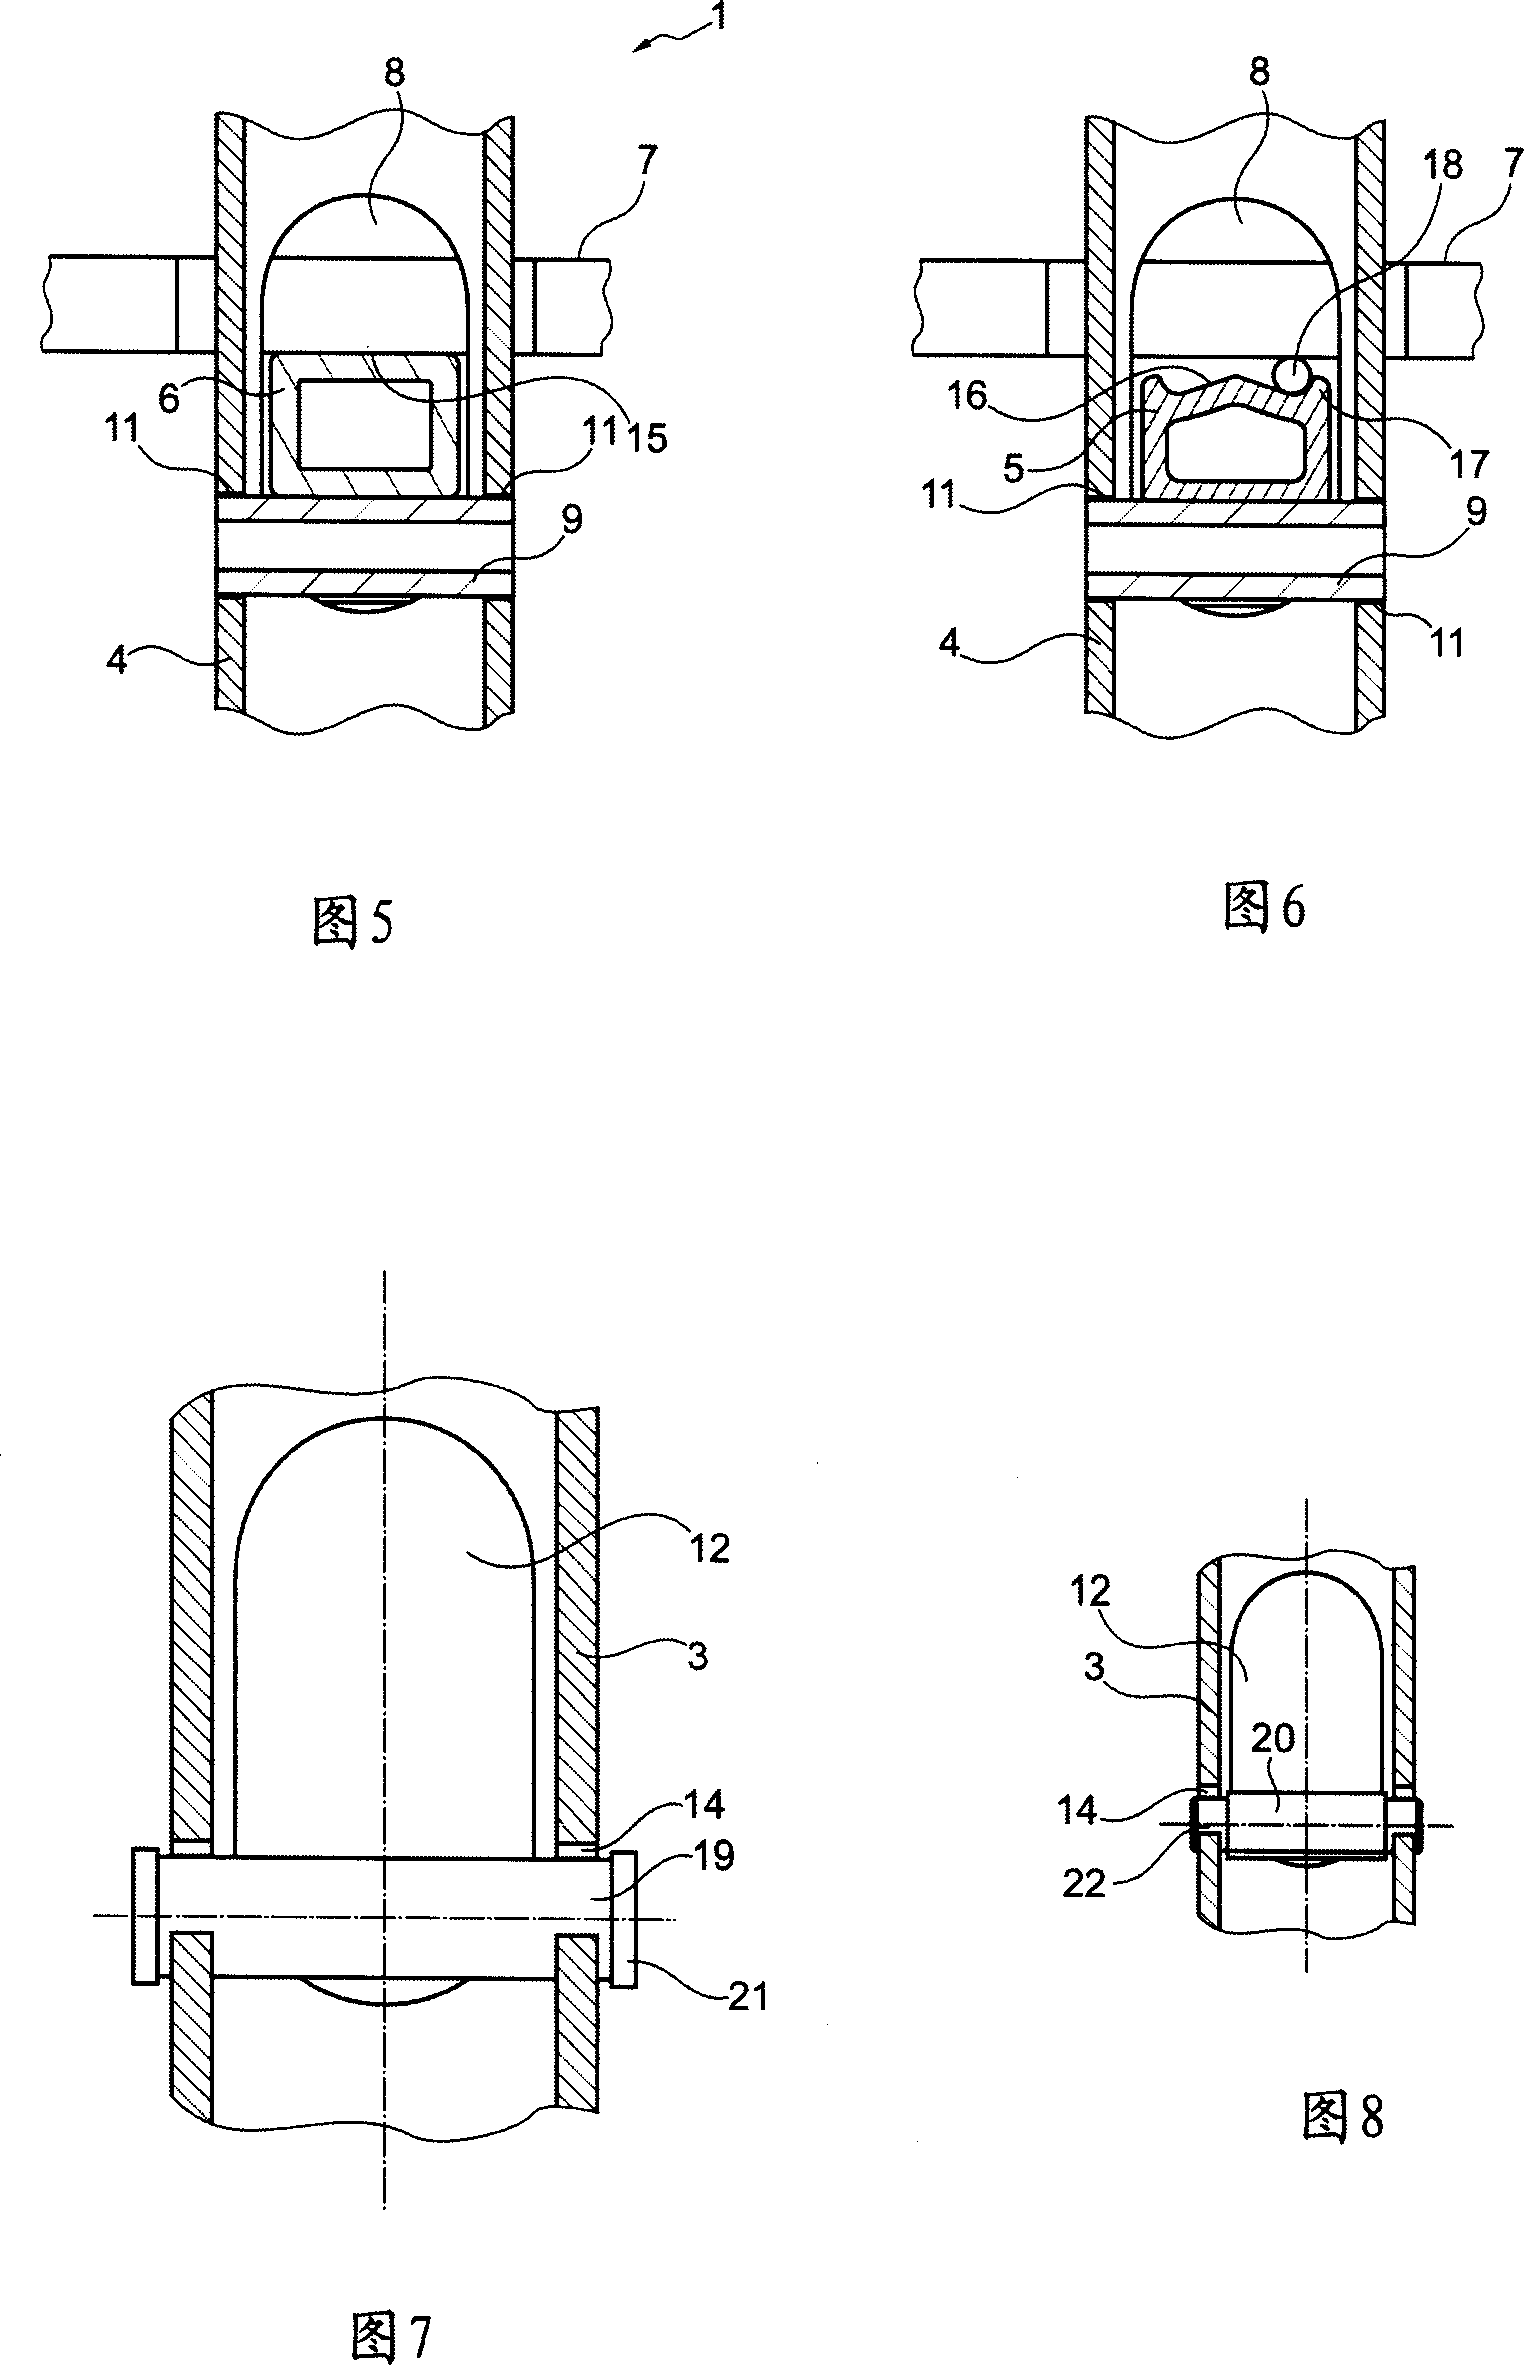 Device for supporting articles to be fired that has a defined compensation of thermal expansions